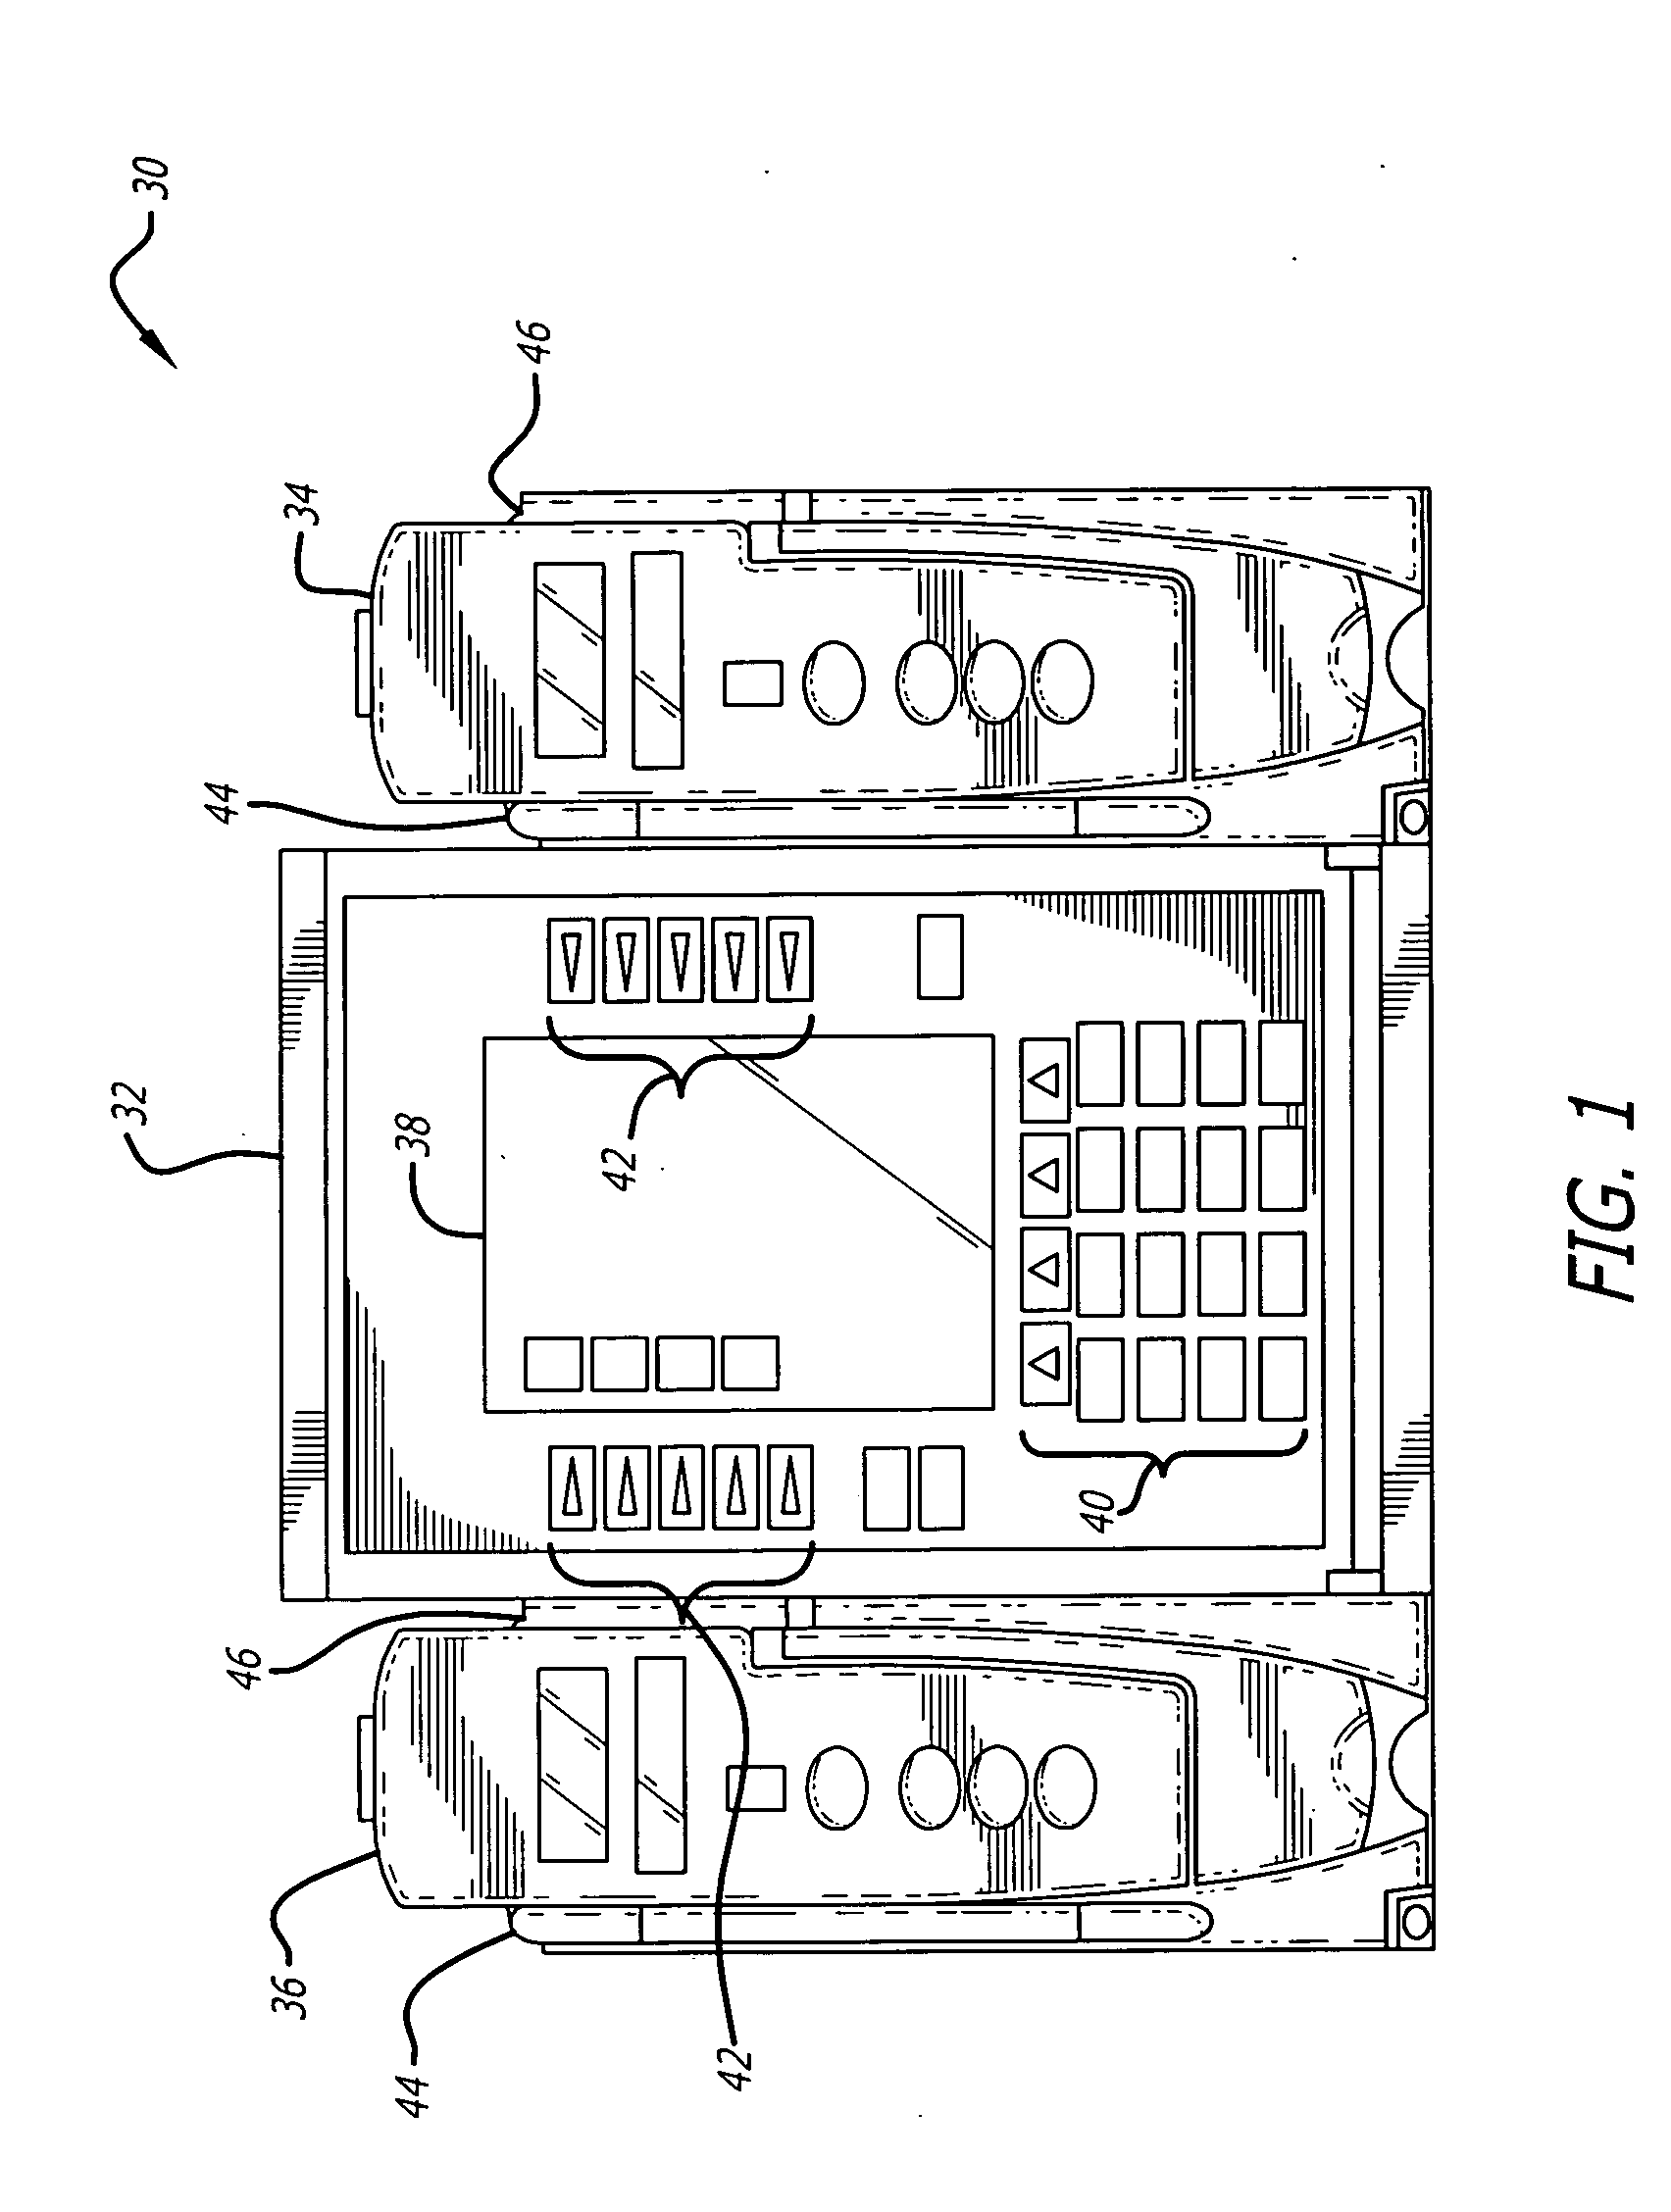 Graphical display of medication limits and delivery program